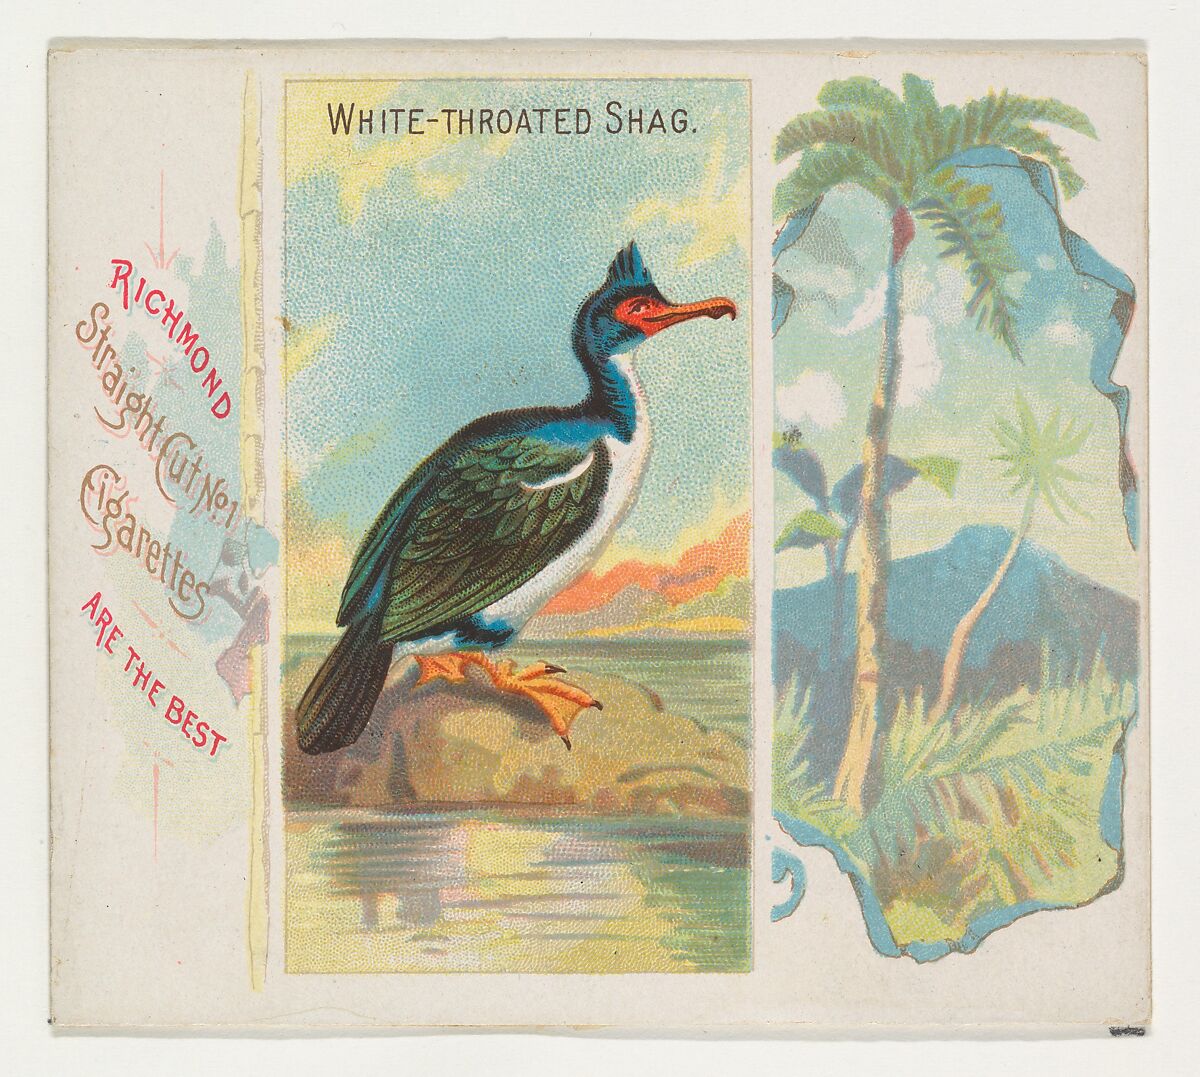 White-Throated Shag, from Birds of the Tropics series (N38) for Allen & Ginter Cigarettes, Issued by Allen &amp; Ginter (American, Richmond, Virginia), Commercial color lithograph 